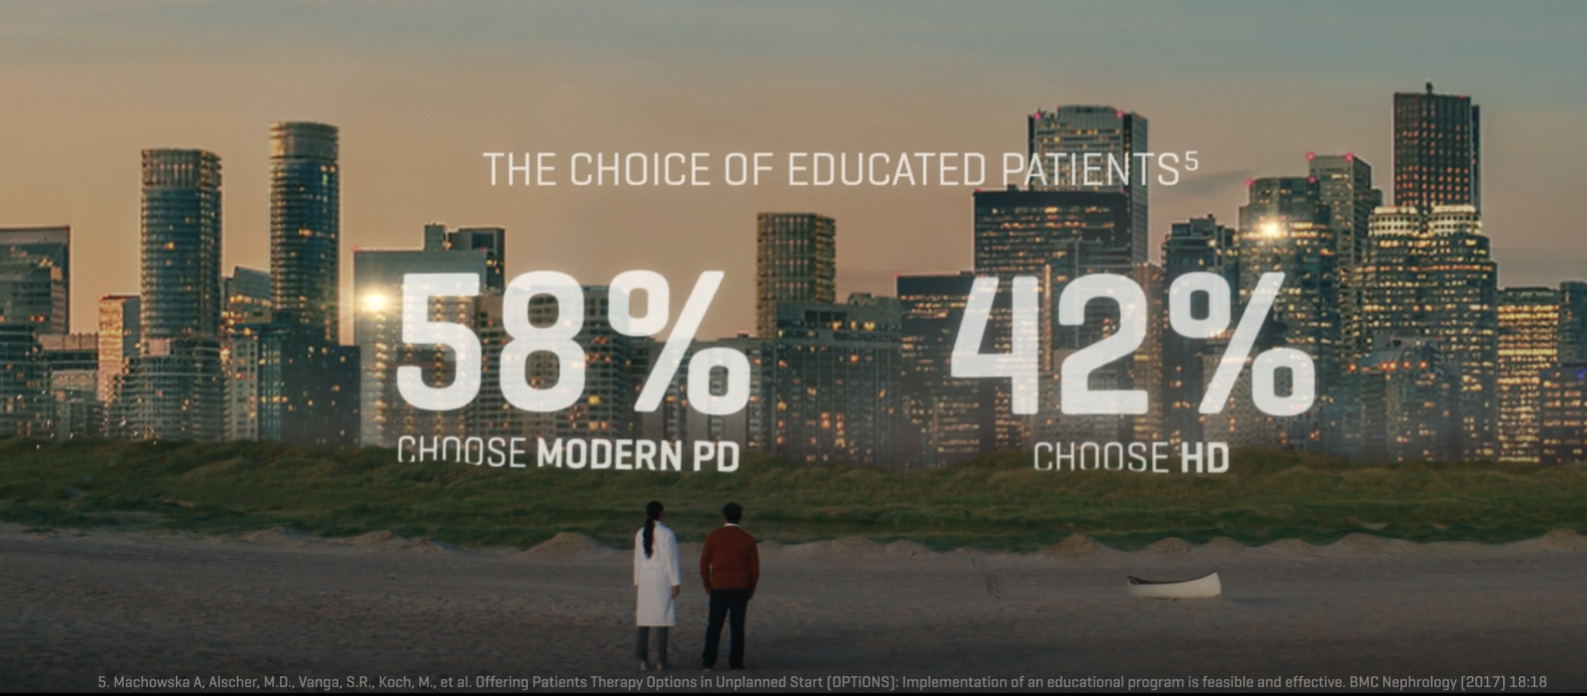 The choice of educated patients